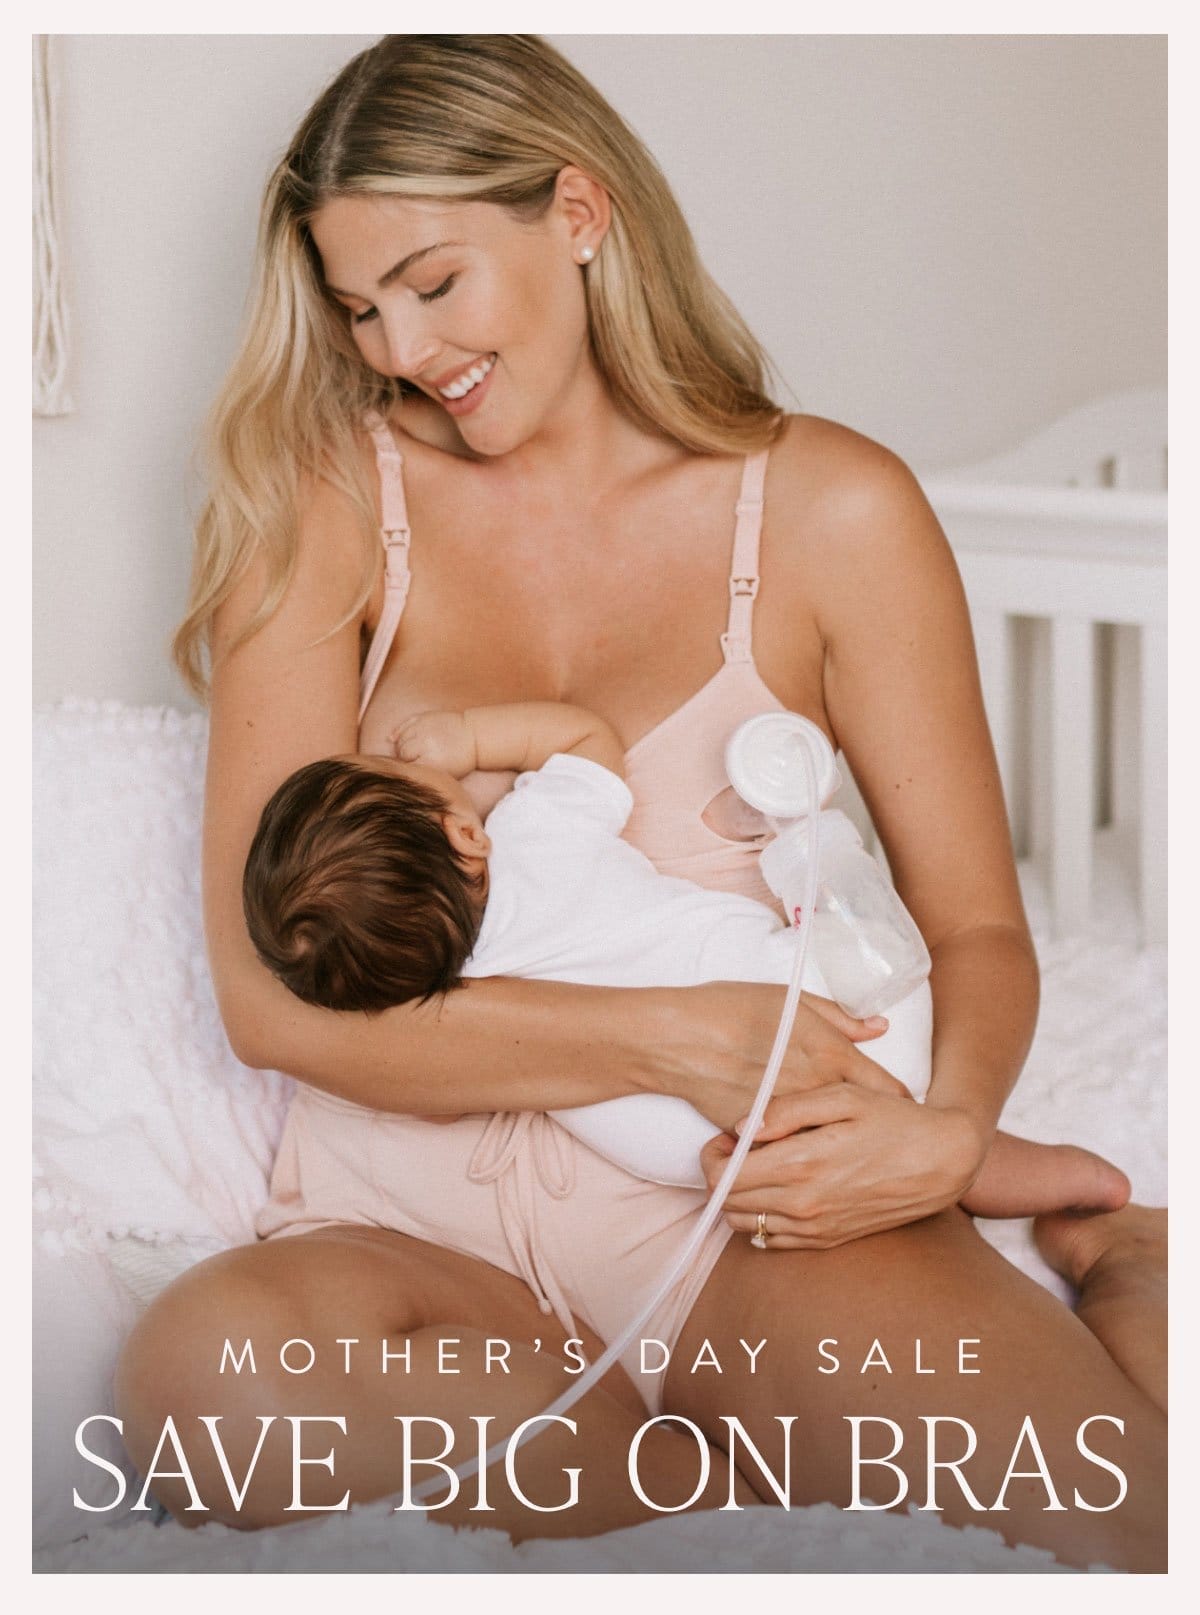 Mother's Day Sale: Save Big on Bras